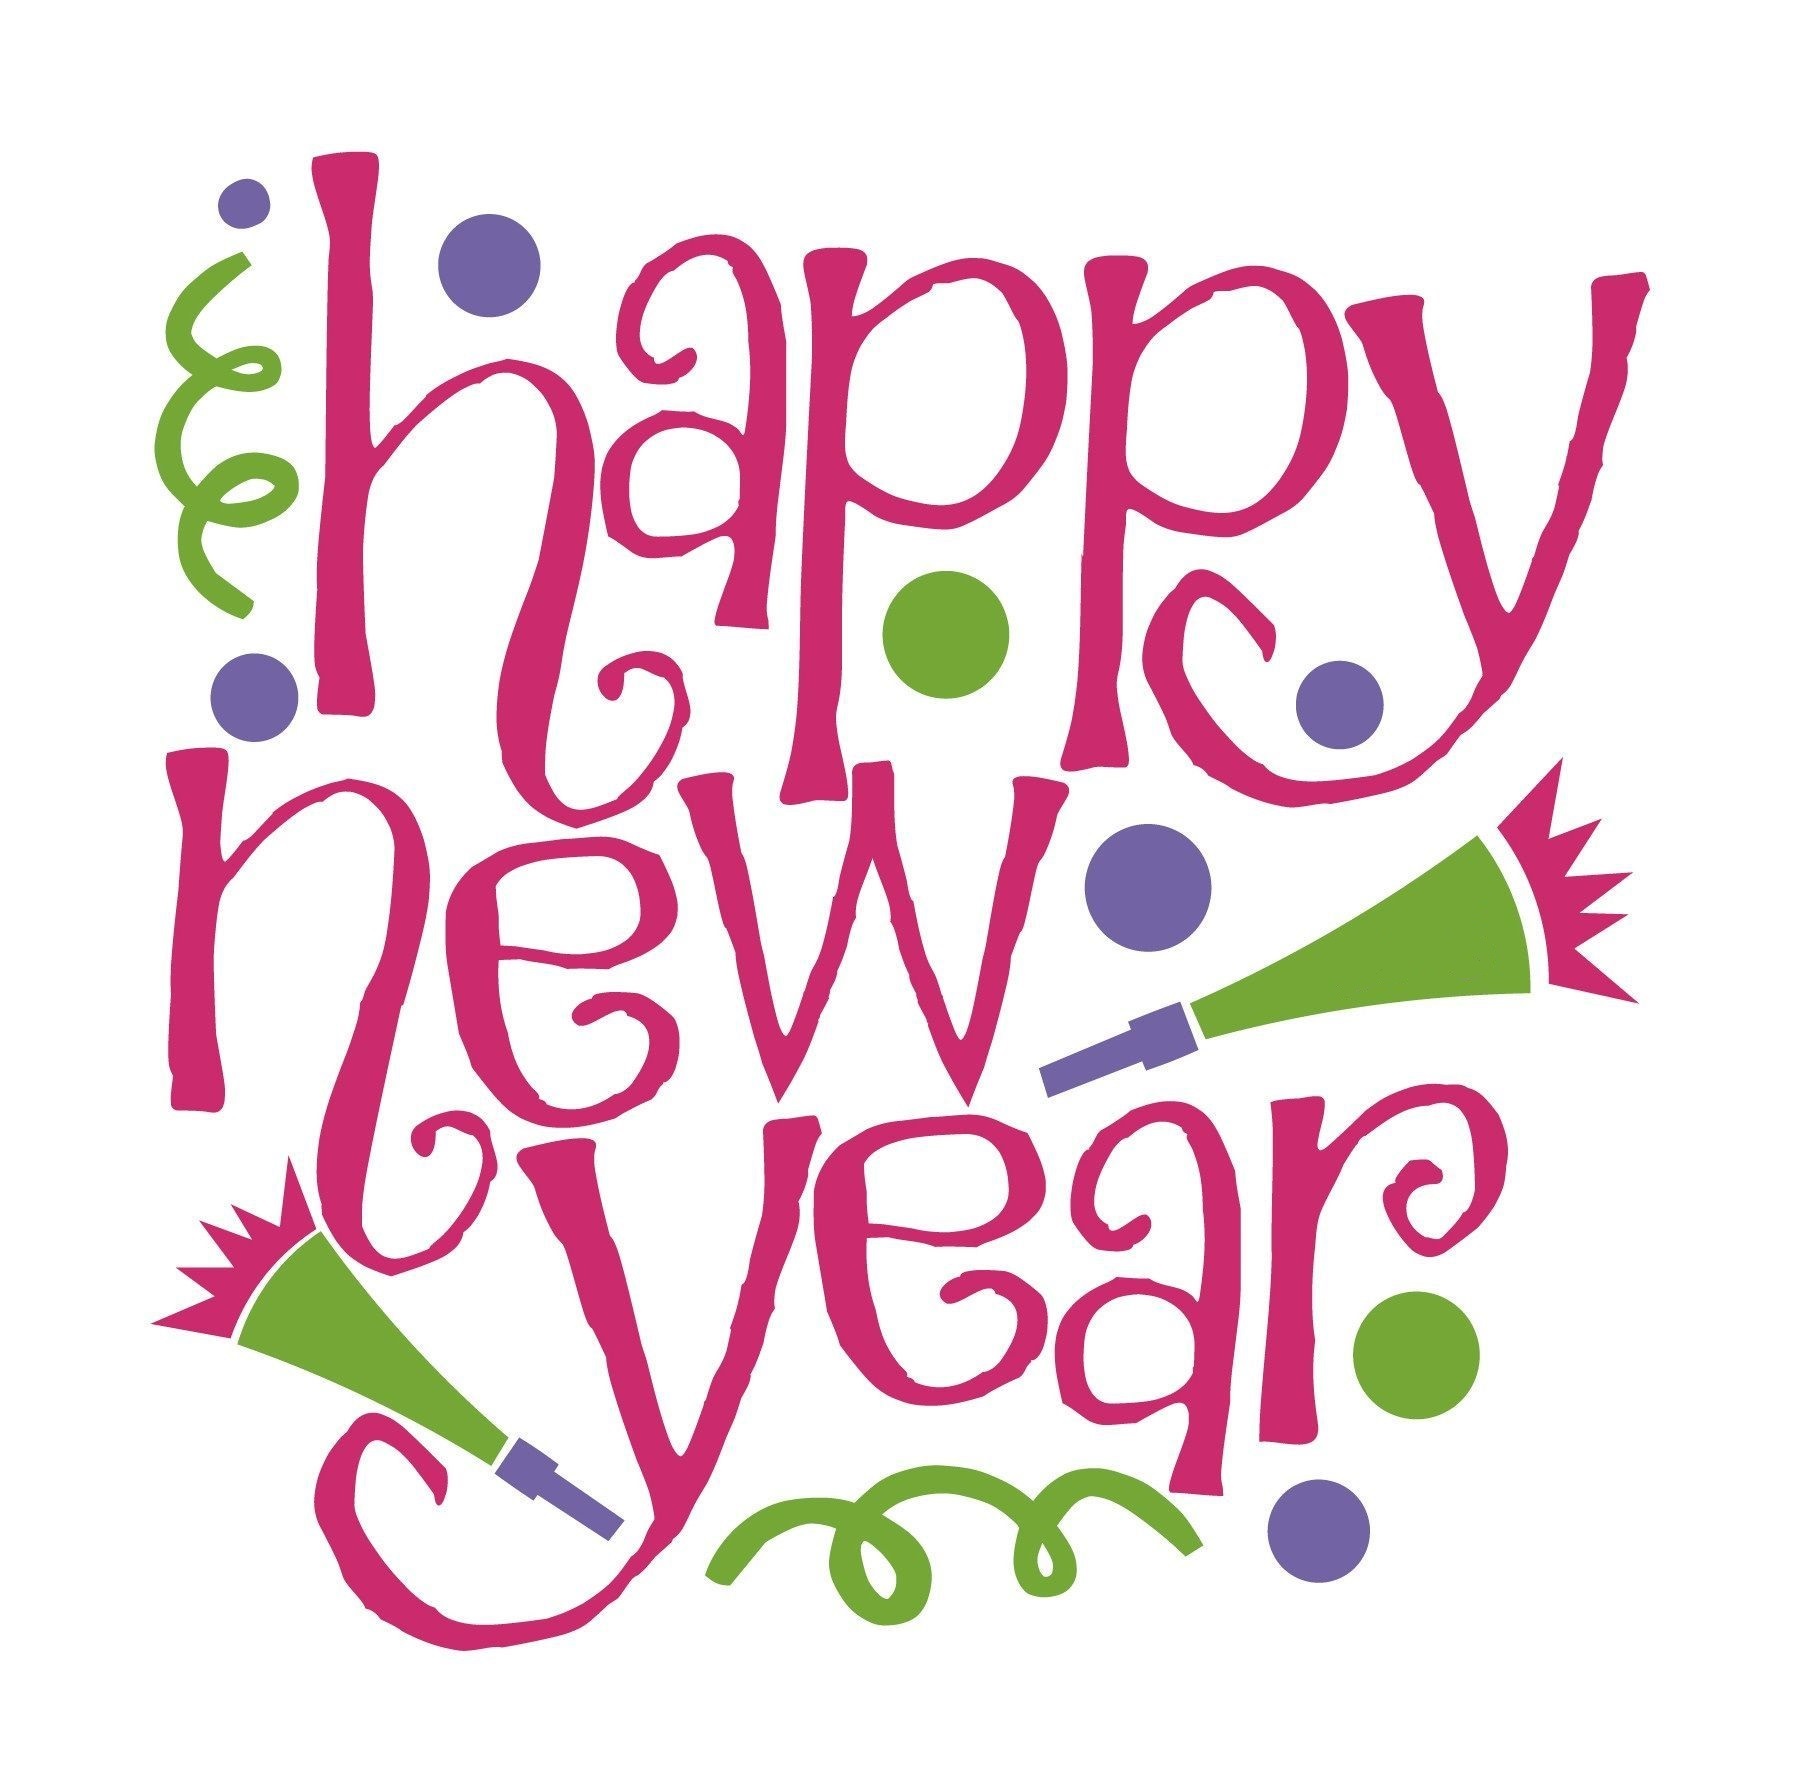 Free clipart florida happy new year